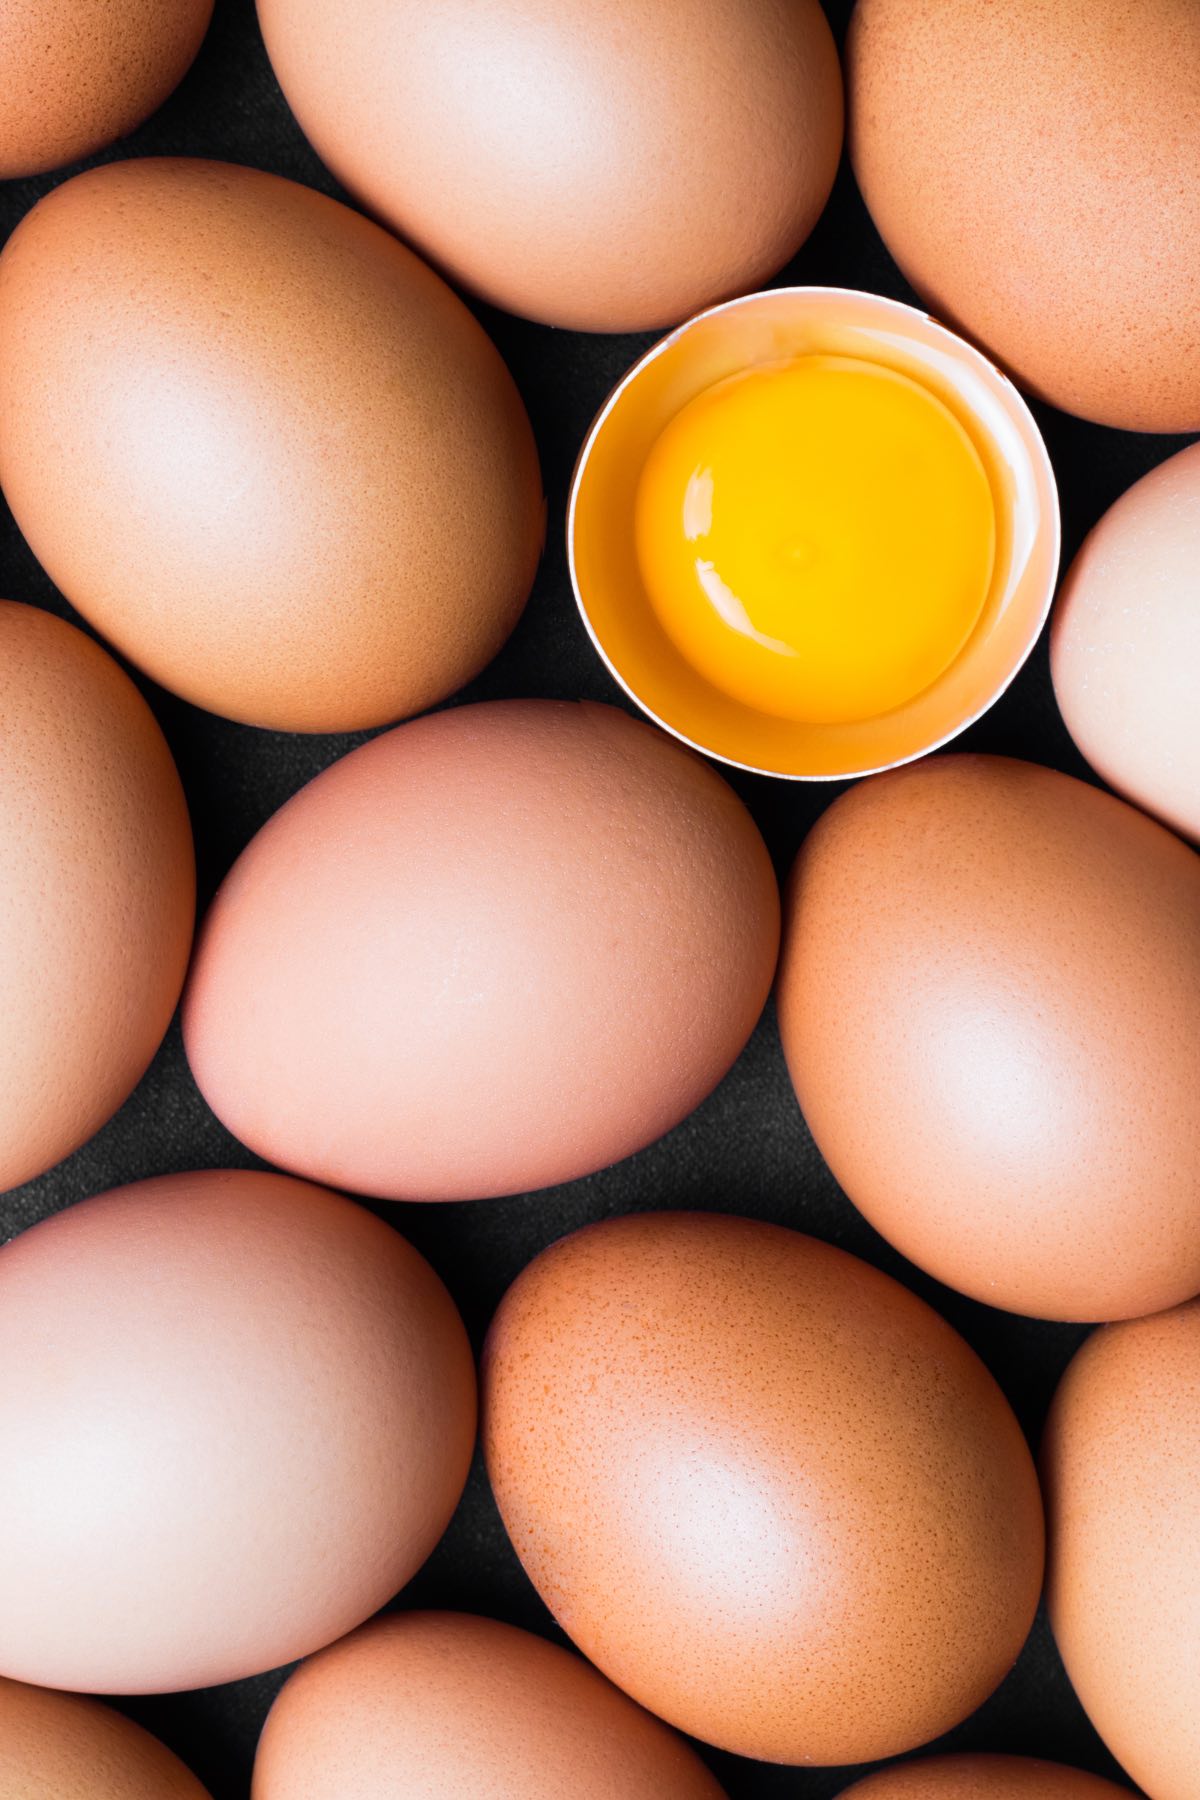 There’s nothing worse than cracking open an egg to find out that it’s gone bad. Eggs are a versatile food used in everything from baked goods to breakfast to fried chicken. If only there was a way to test for freshness without having to crack an egg. Well, there is!